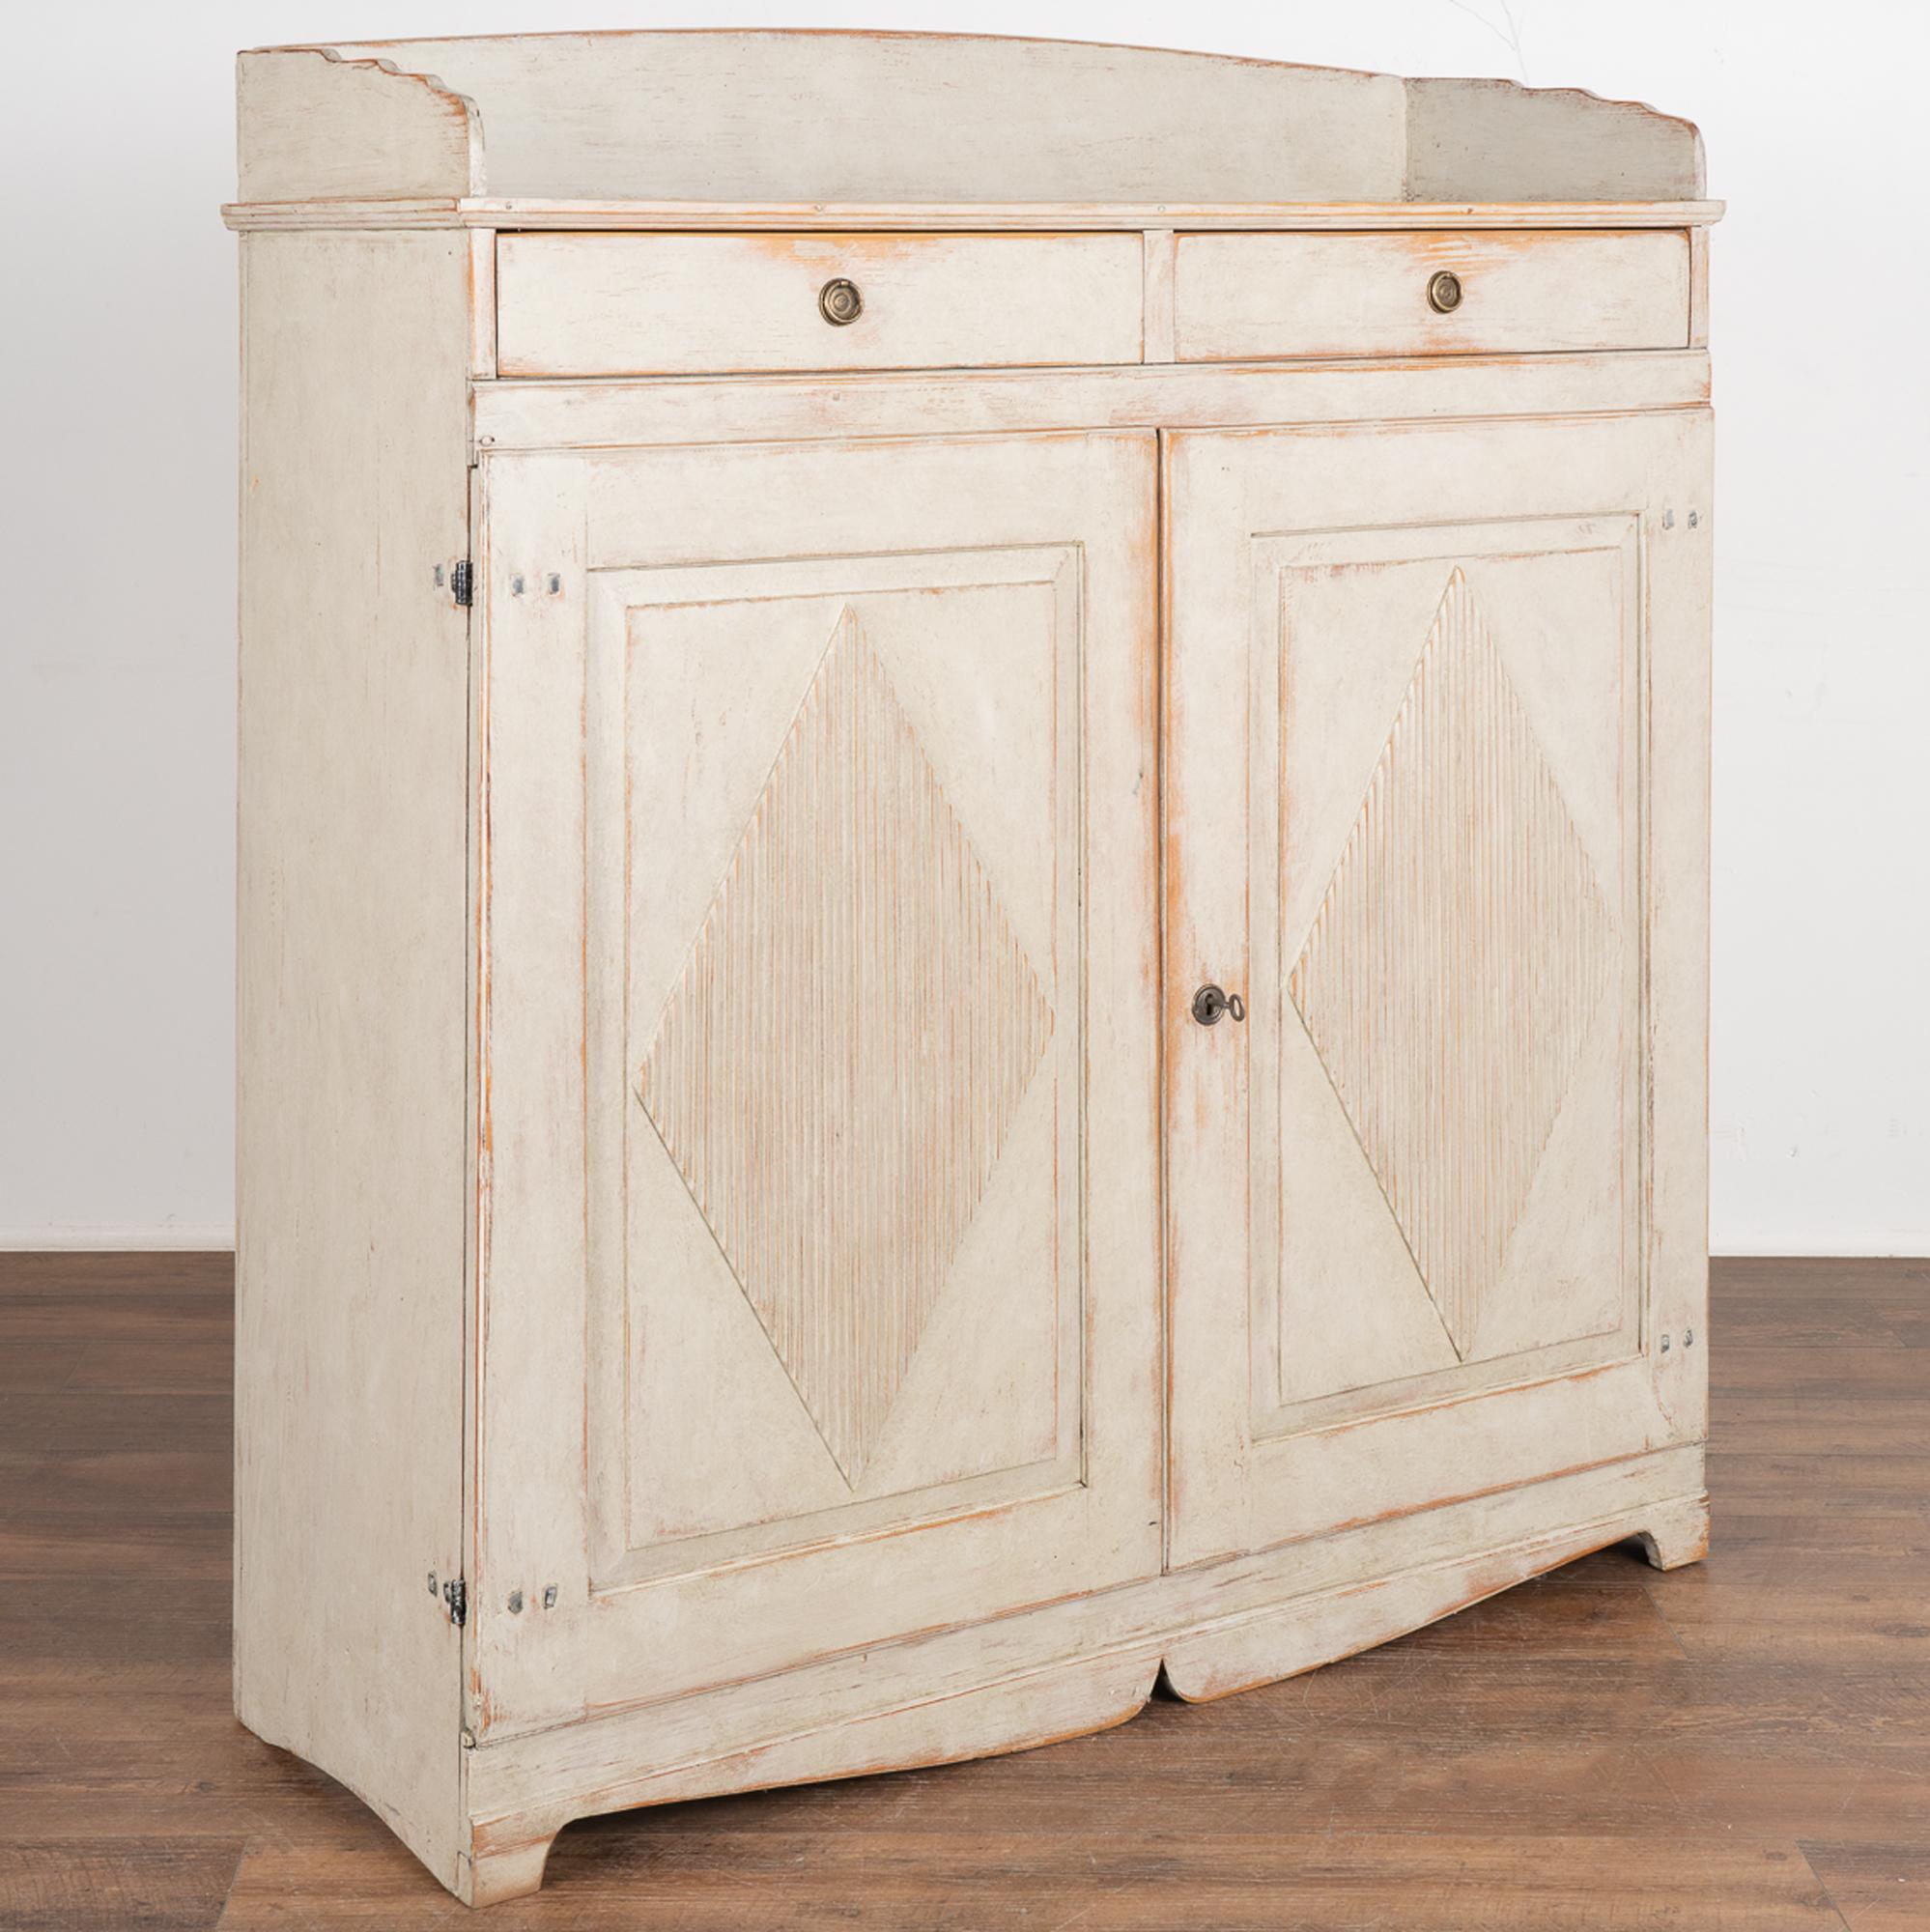 Gustavian tall pine sideboard or serving buffet with traditional decorative fluted diamond panels on cabinet doors, two small upper drawers with brass pulls.
One key included to use as pull for doors. 
The soft dove gray exterior is slightly